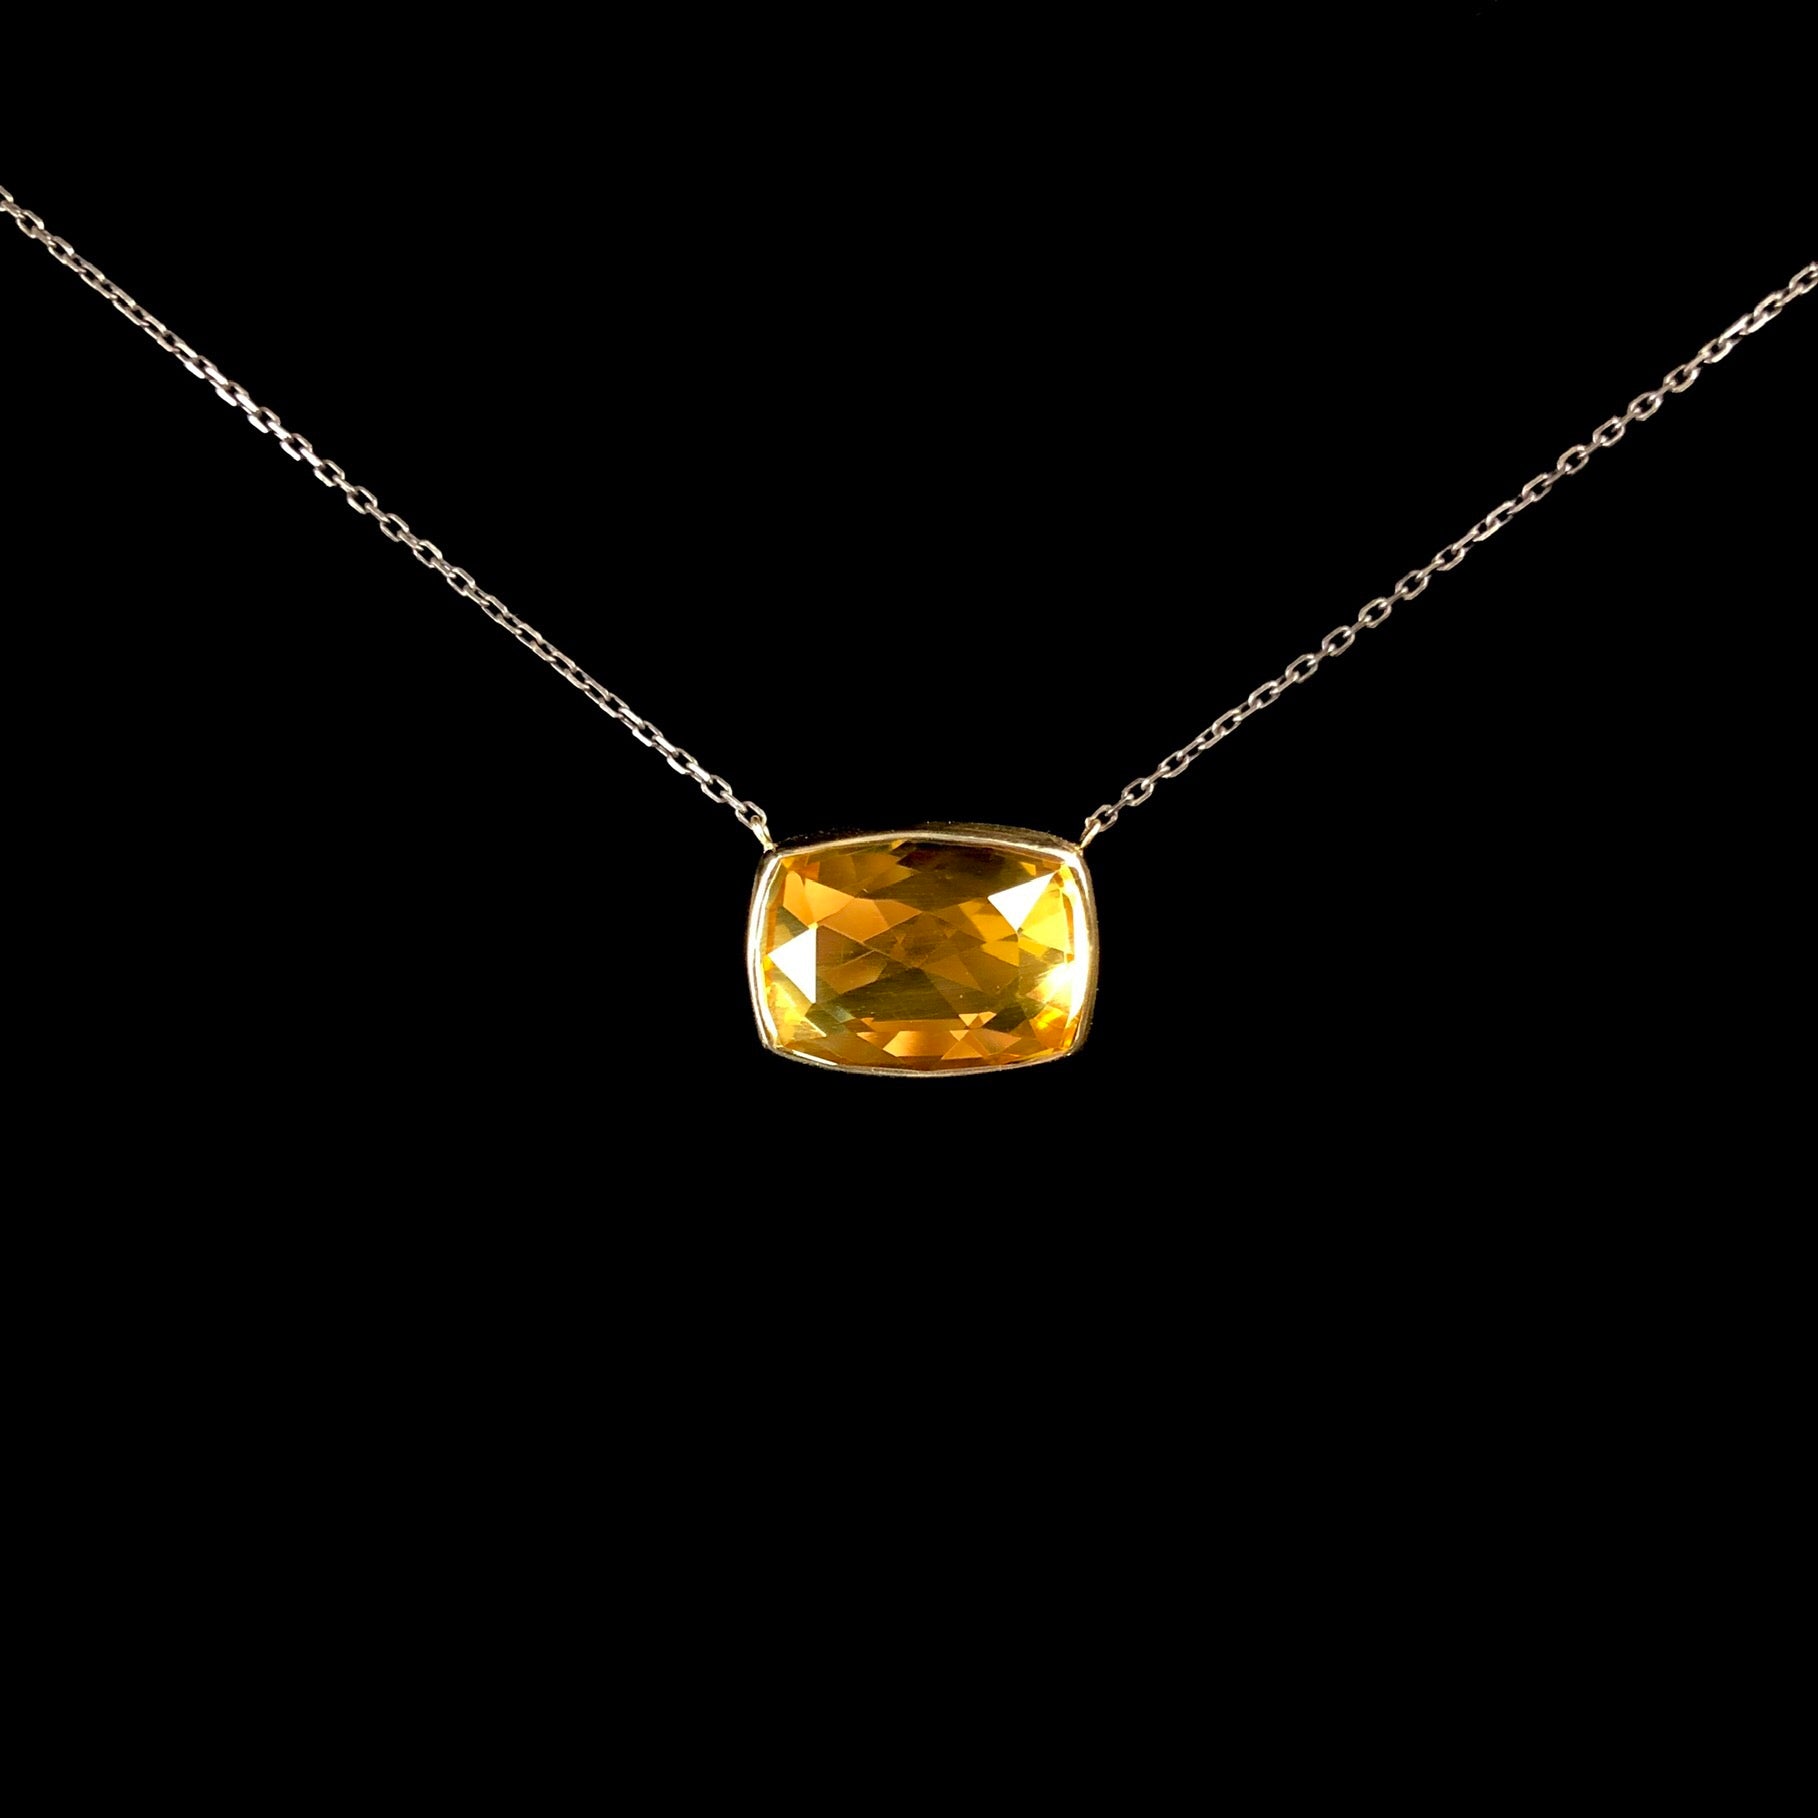 Yellow rectangular stone set in gold hanging on oxidized silver chain